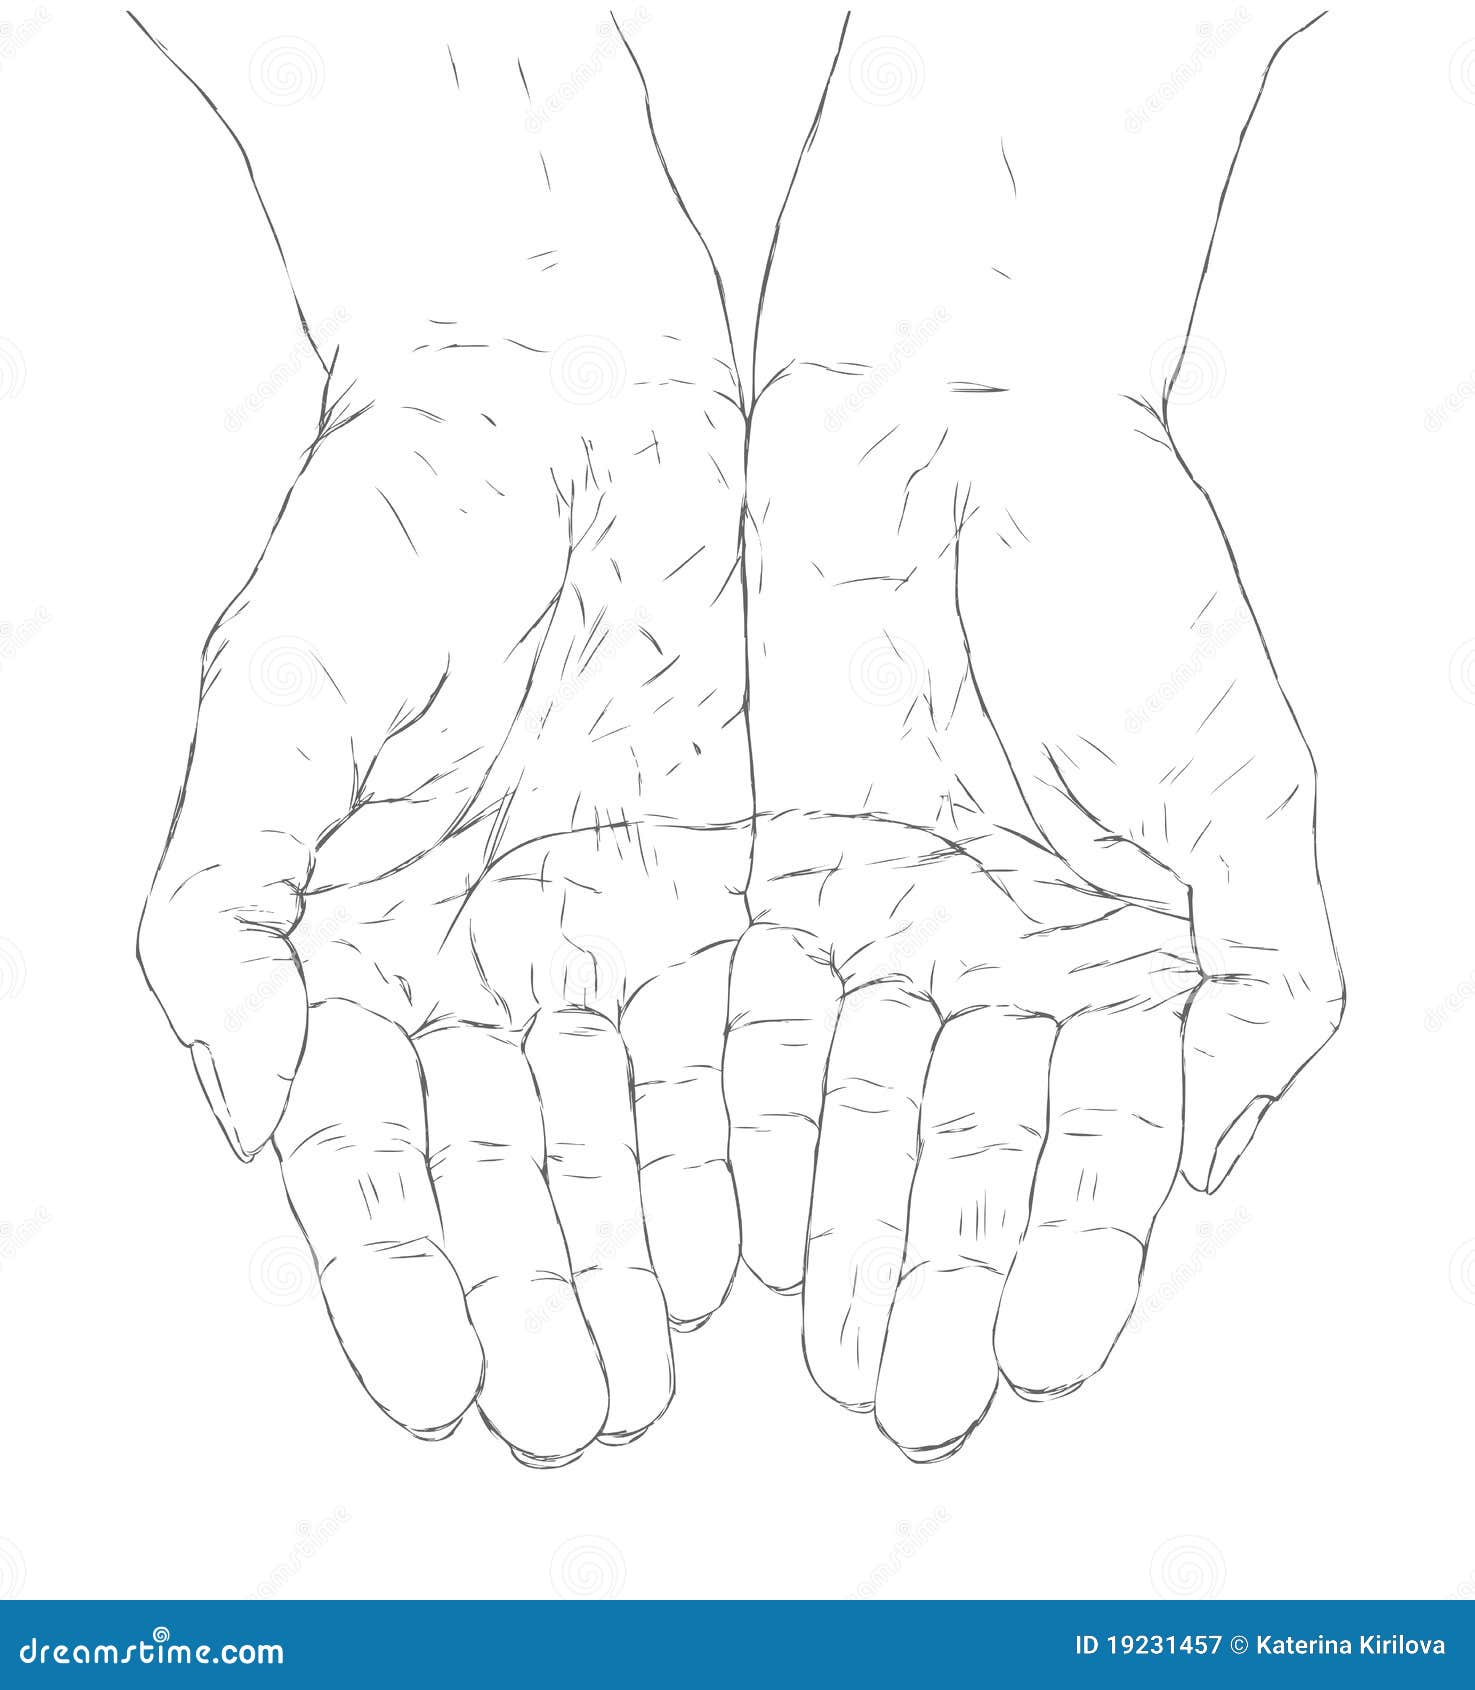 Cupped hands stock vector. Illustration of drawing, drawn - 19231457